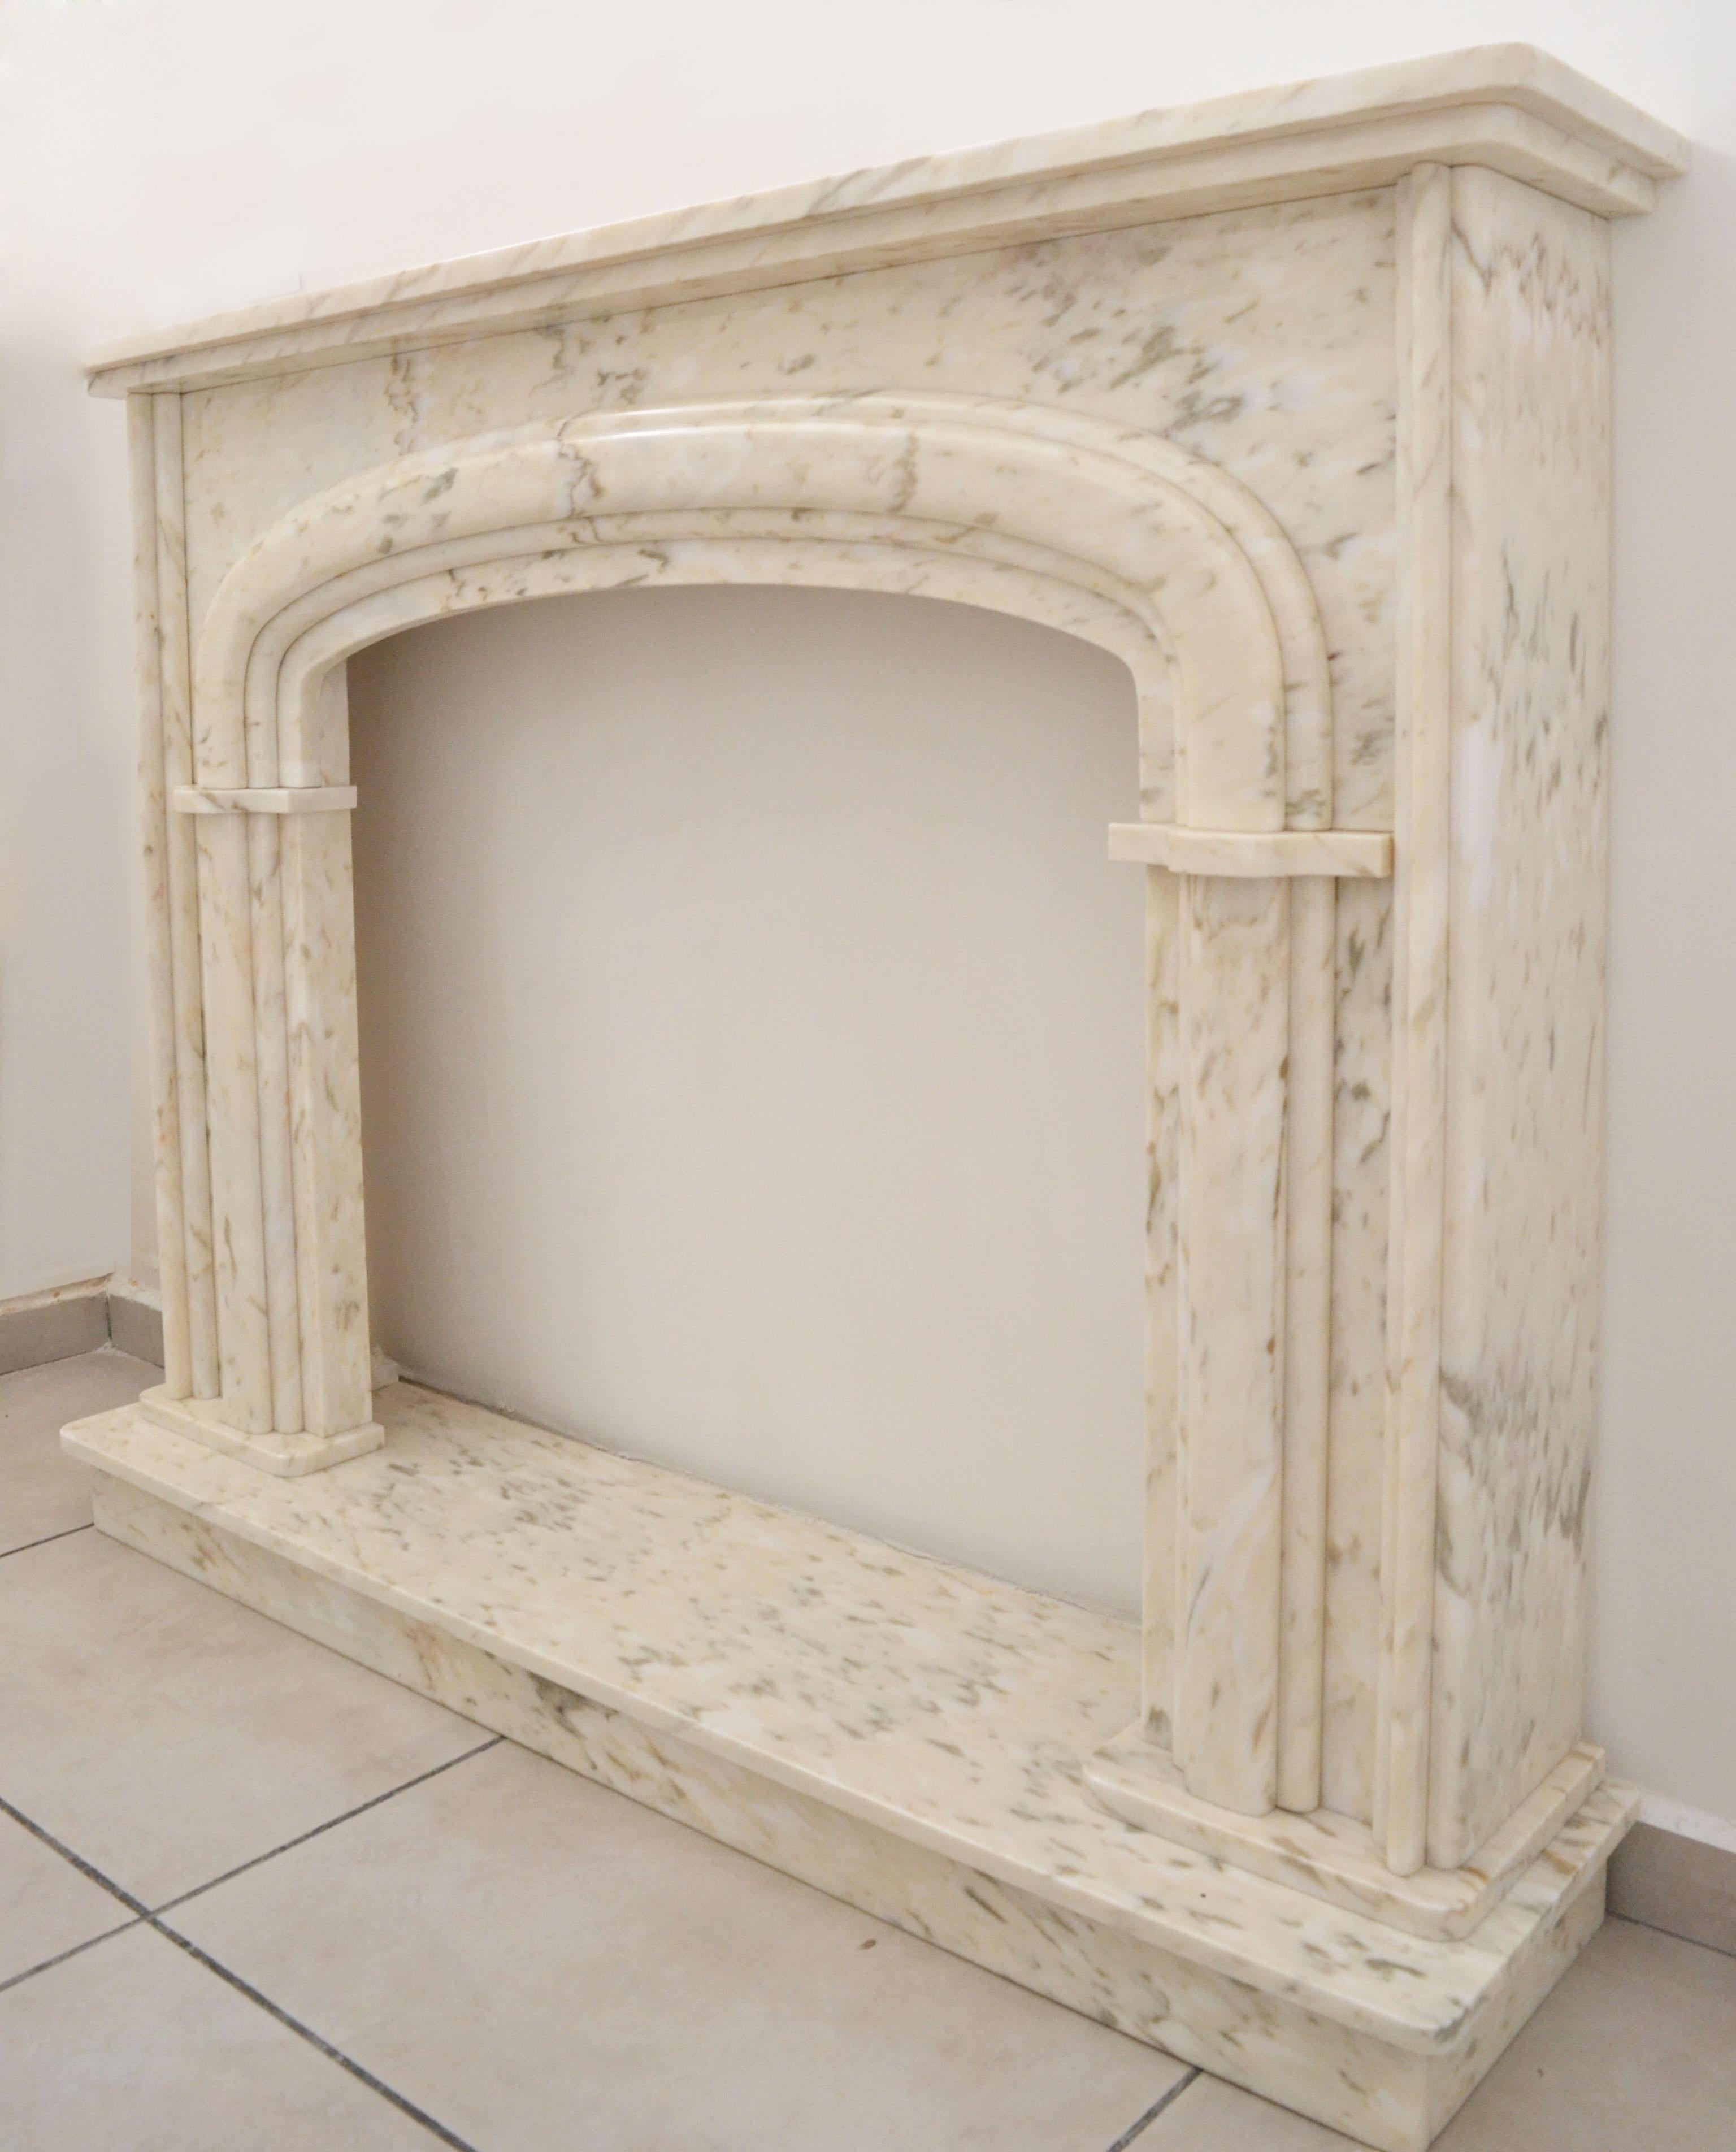 A beautiful brand new fireplace surround / mantel designed by the Spanish Design House Element&Co.

Crafted from Italian ivory marble sourced from the Verona region this piece will provide a Classic finishing touch for any lounge.

The soft curves